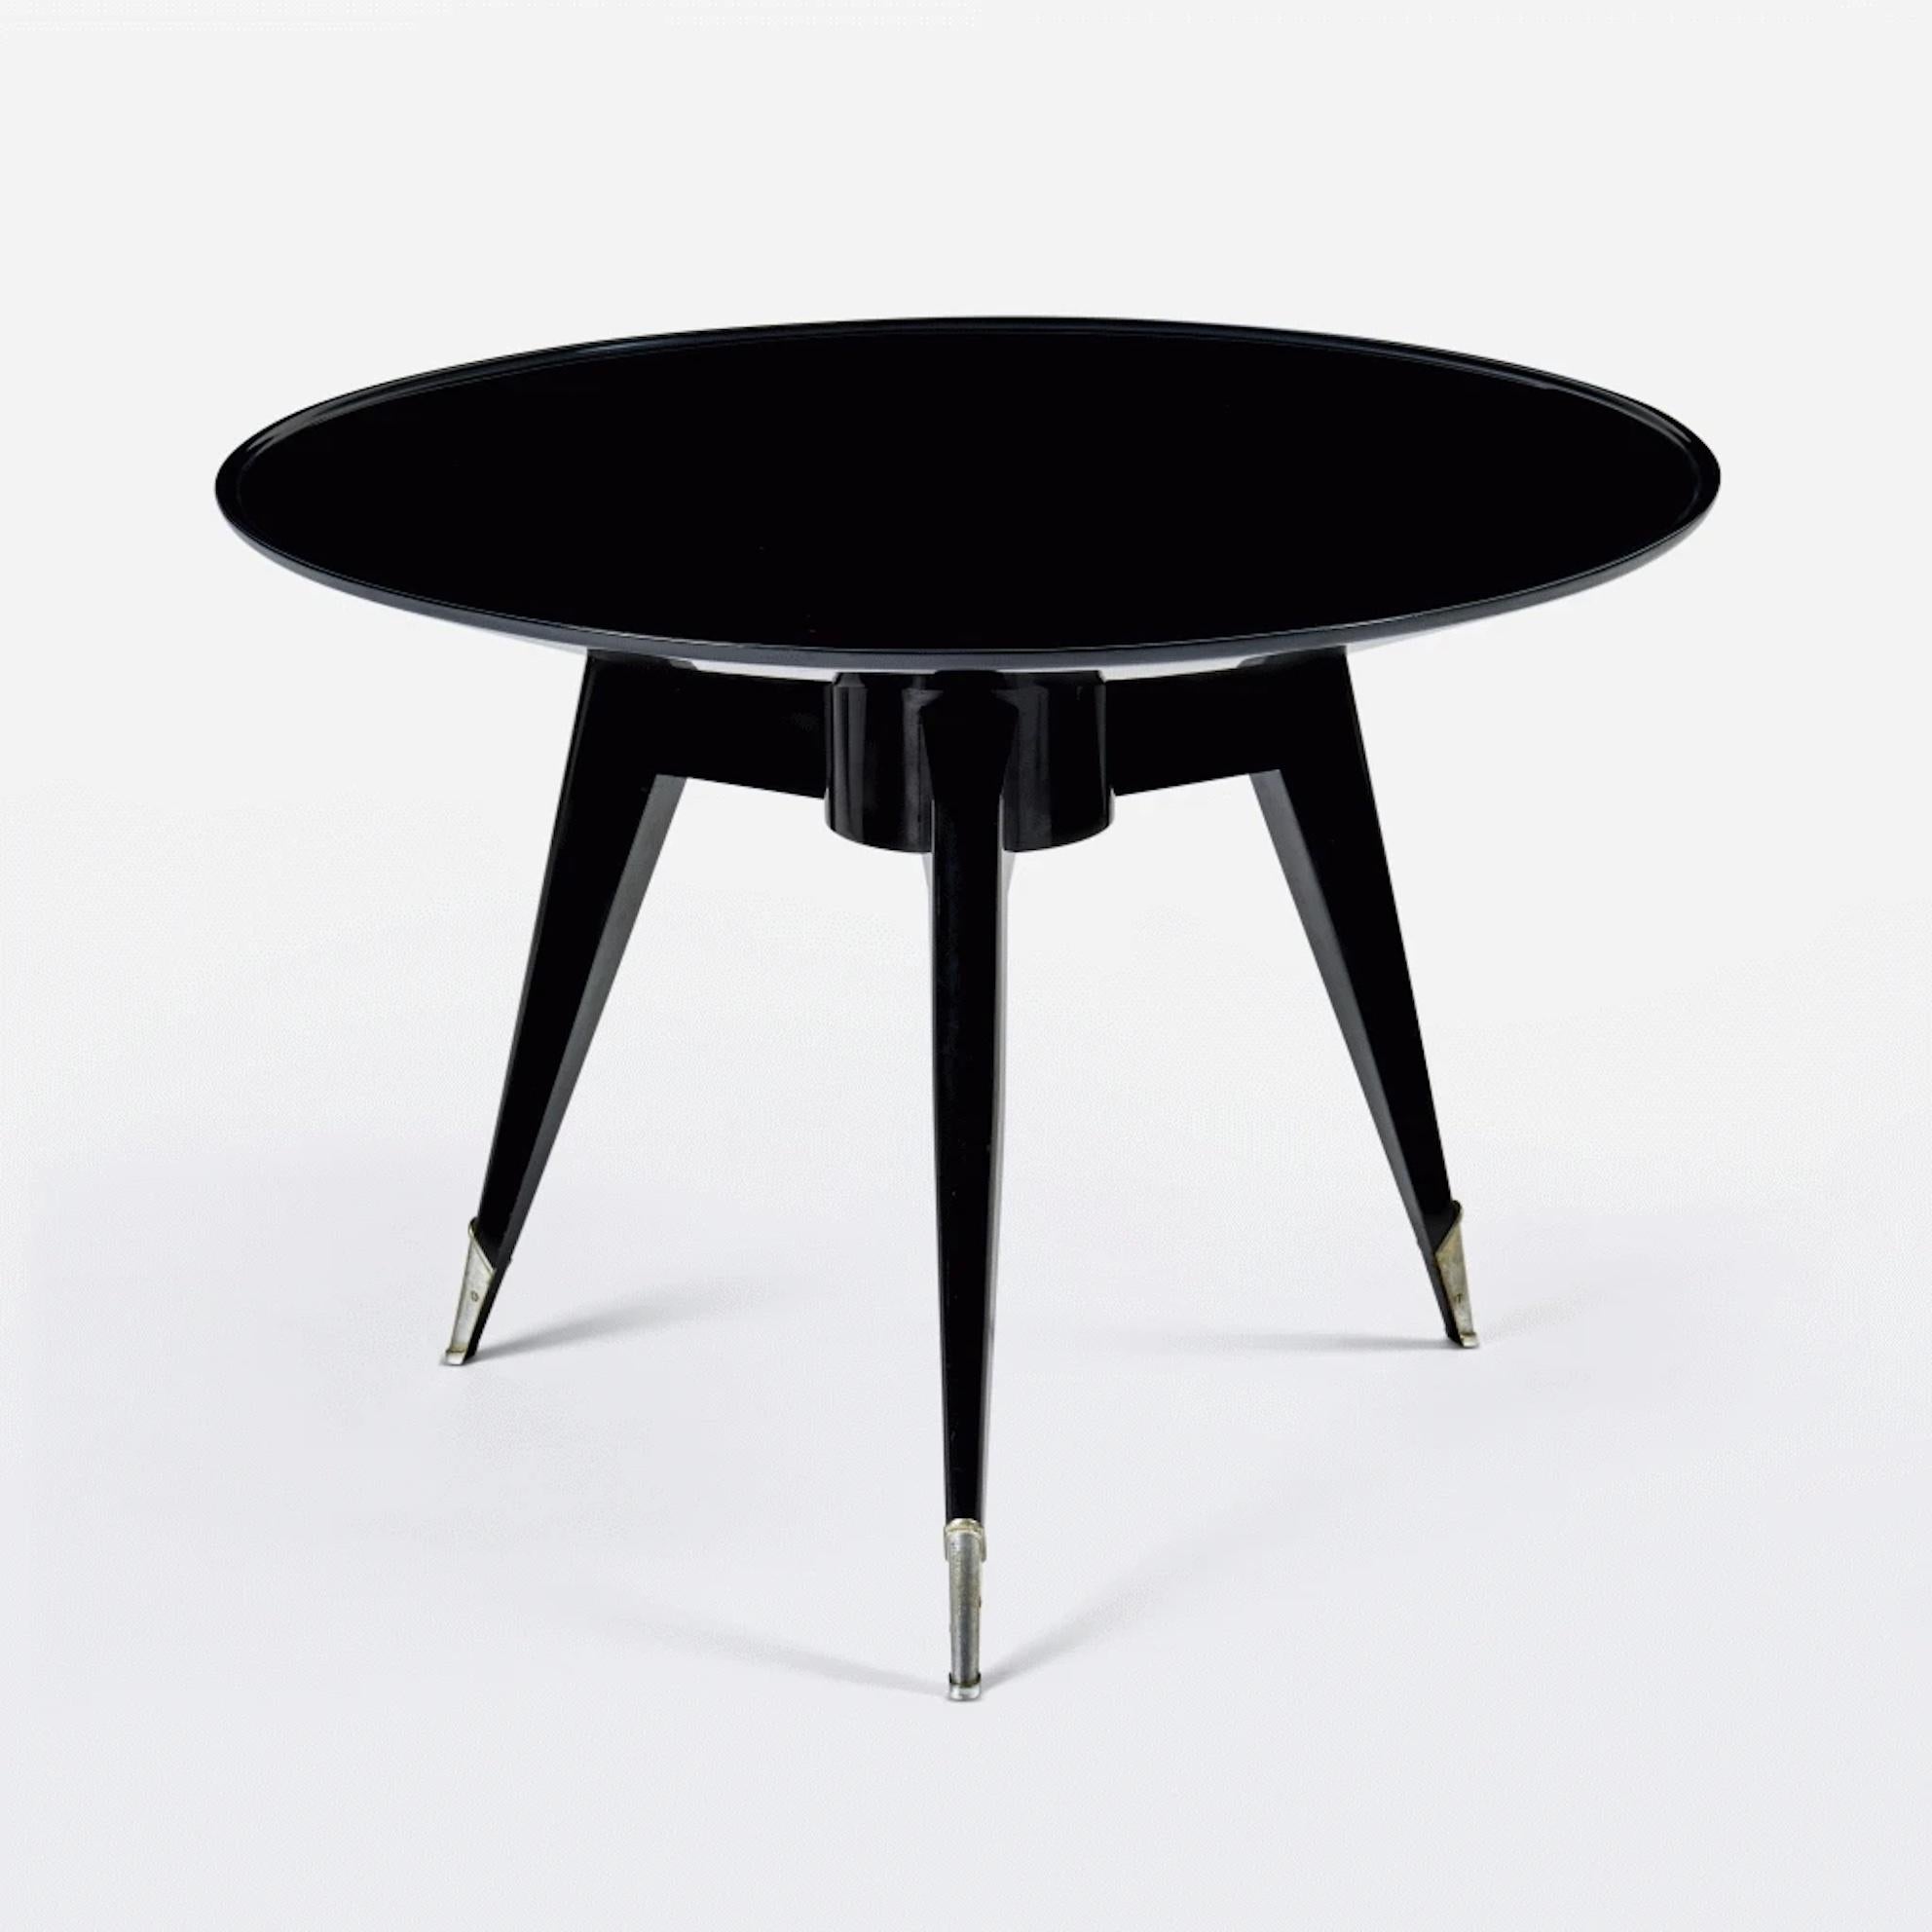 Black Lacquered wood and silvered bronze side table Alfred Porteneuve (1896-1949) Portenveuve was the Nephew of Jacques Emile Ruhlman and was Influenced and trained by Ruhlmann. France: circa 1930 Provenance : De Lorenzo Gallery, New York. Acquired